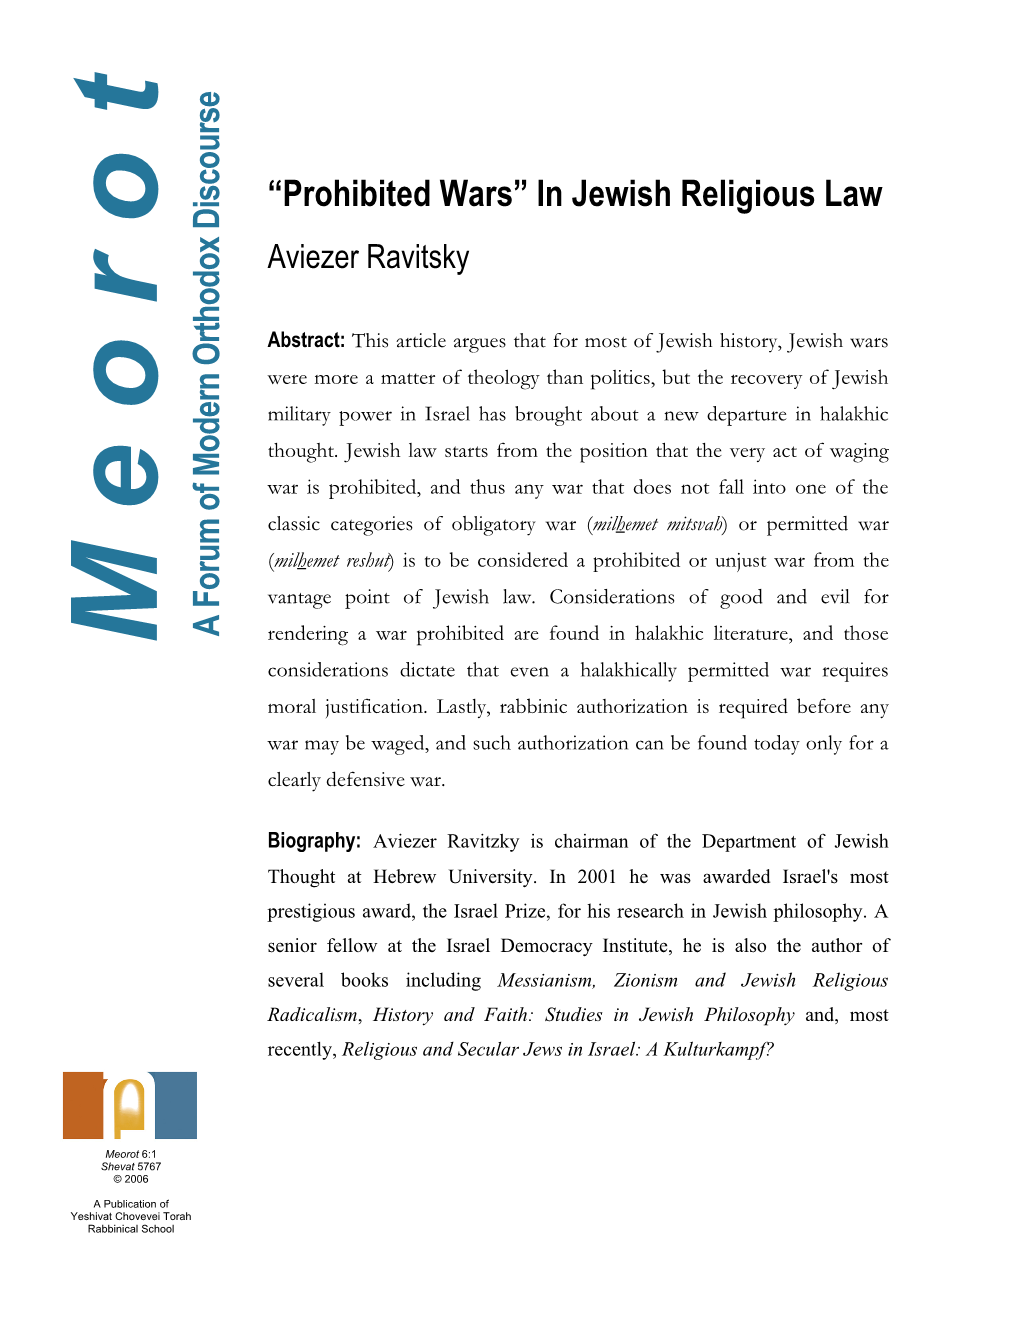 “Prohibited Wars” in Jewish Religious Law